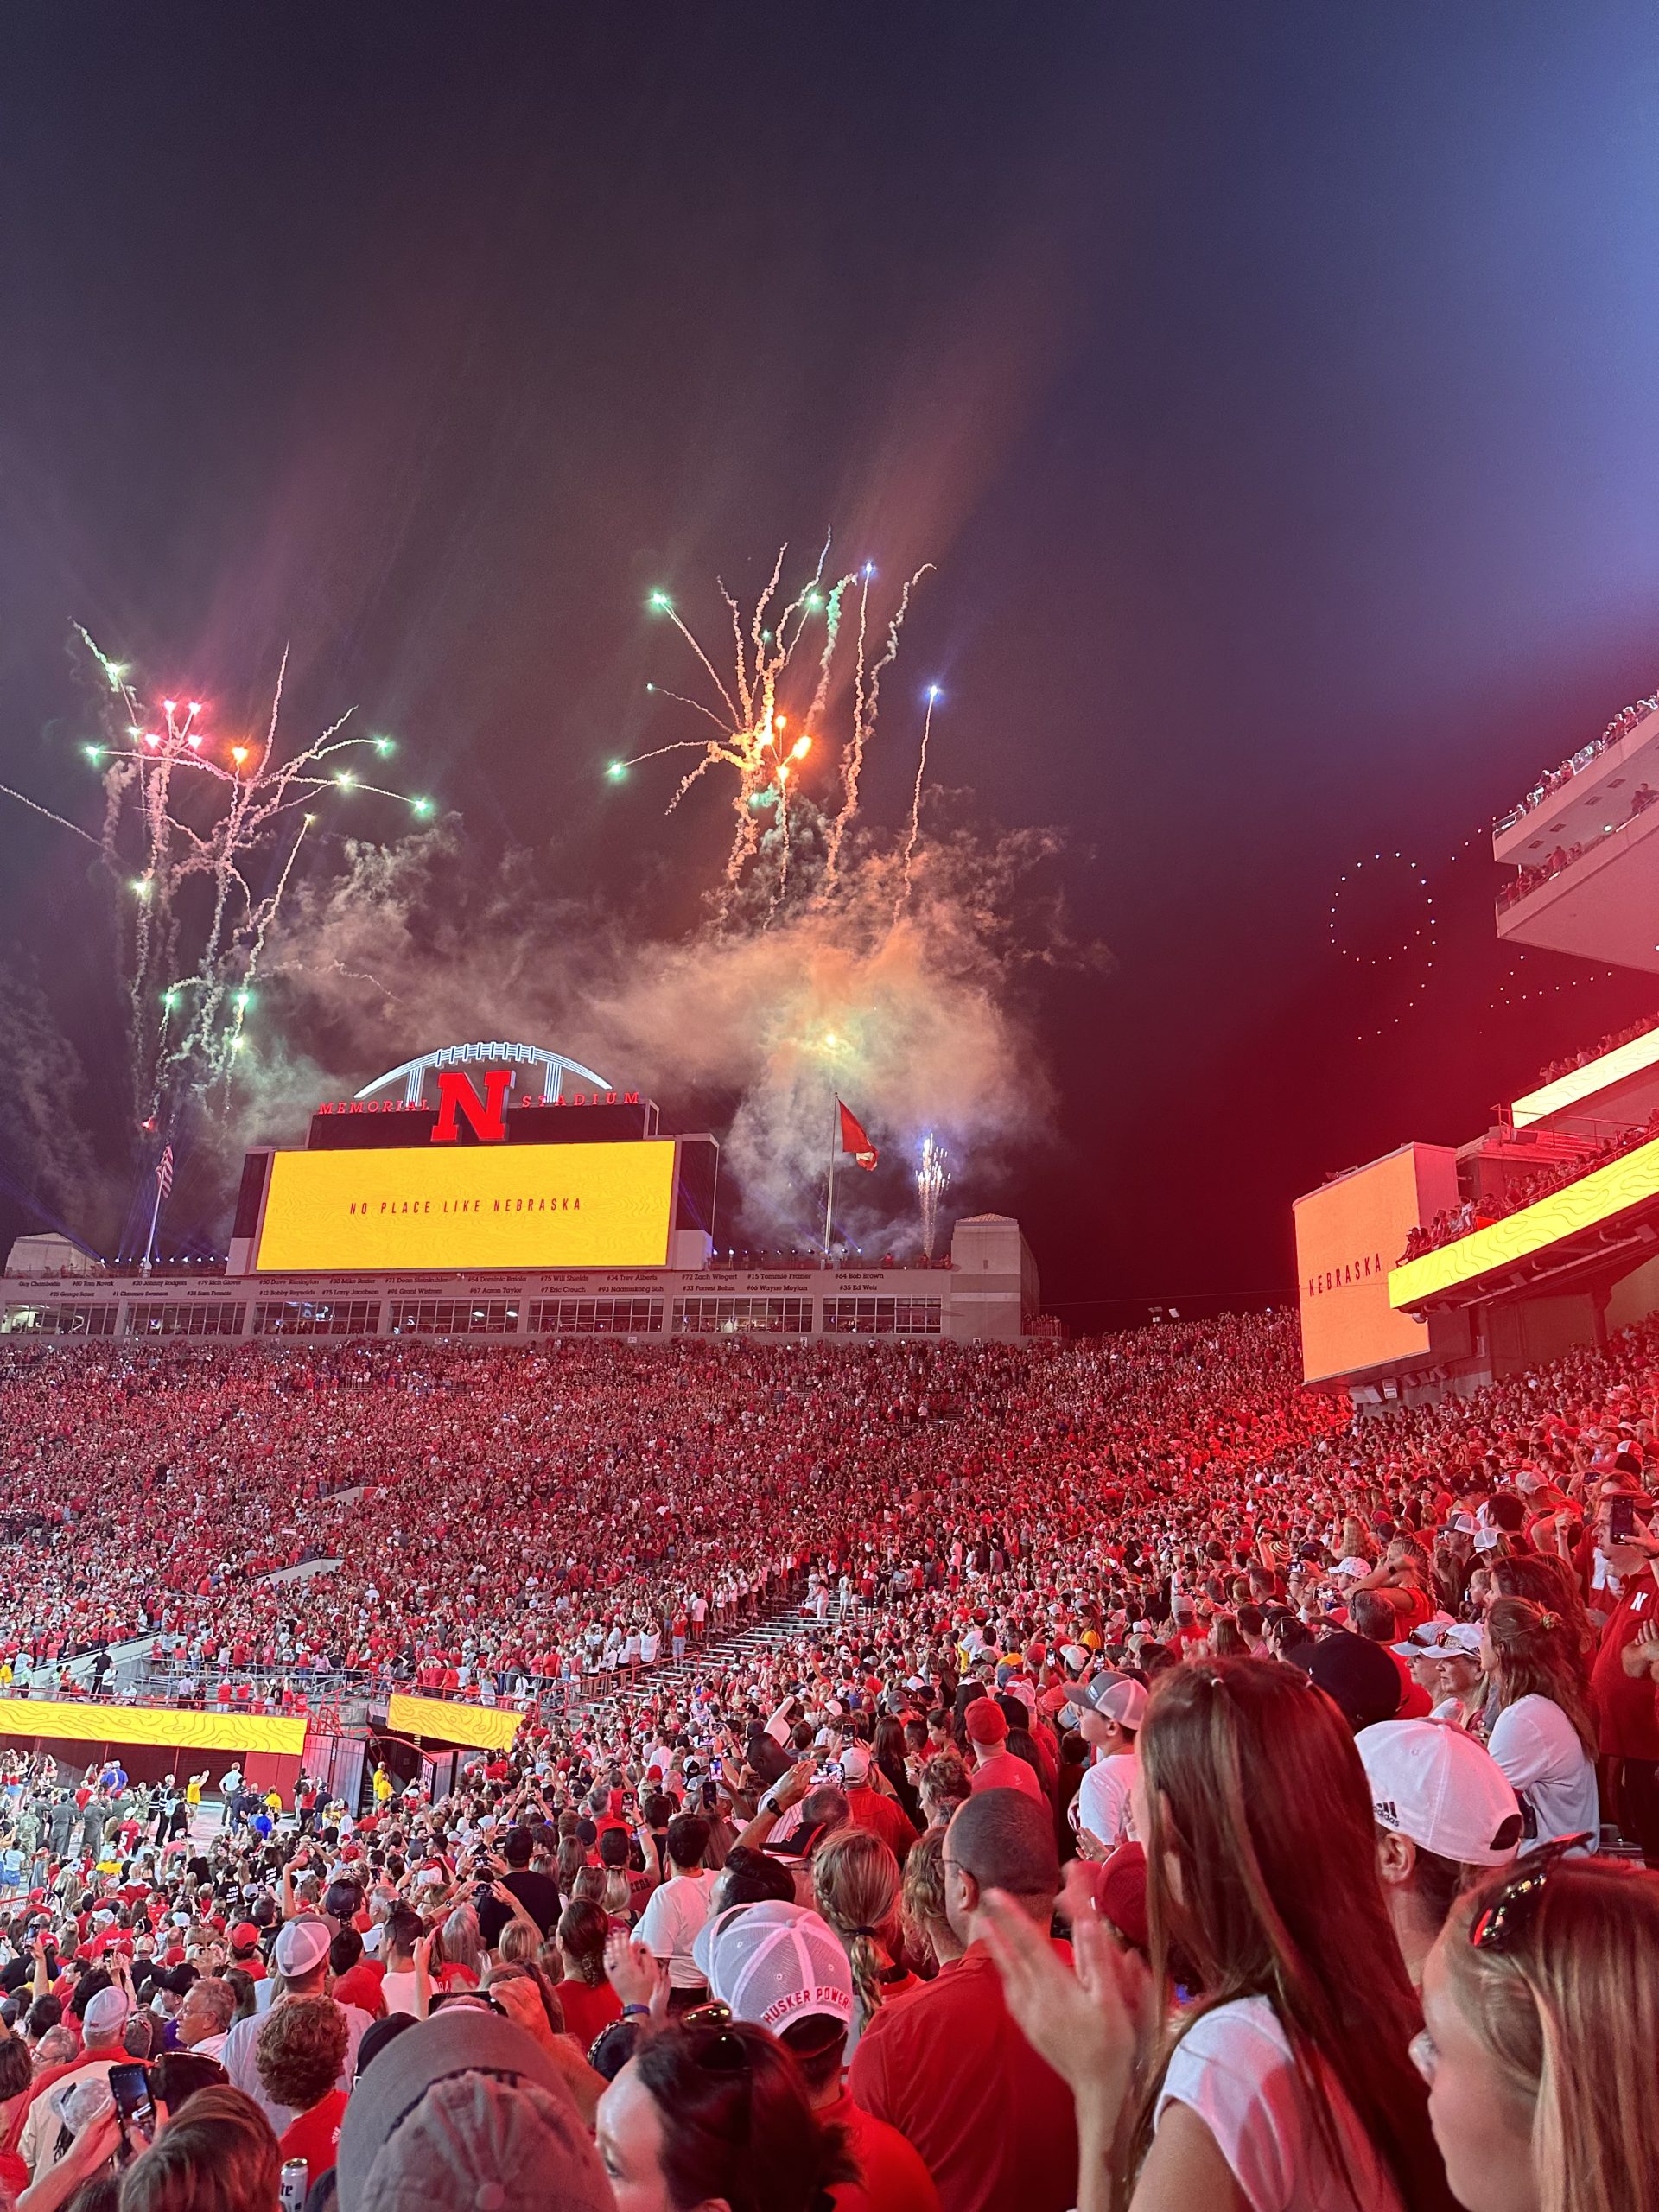 Fireworks display over Memorial Stadium during Volleyball Day, after the Husker Volleyball team defeated the University of  Omaha. The number 92,003 was displayed by drones, the number of seats that were sold for the record breaking game.